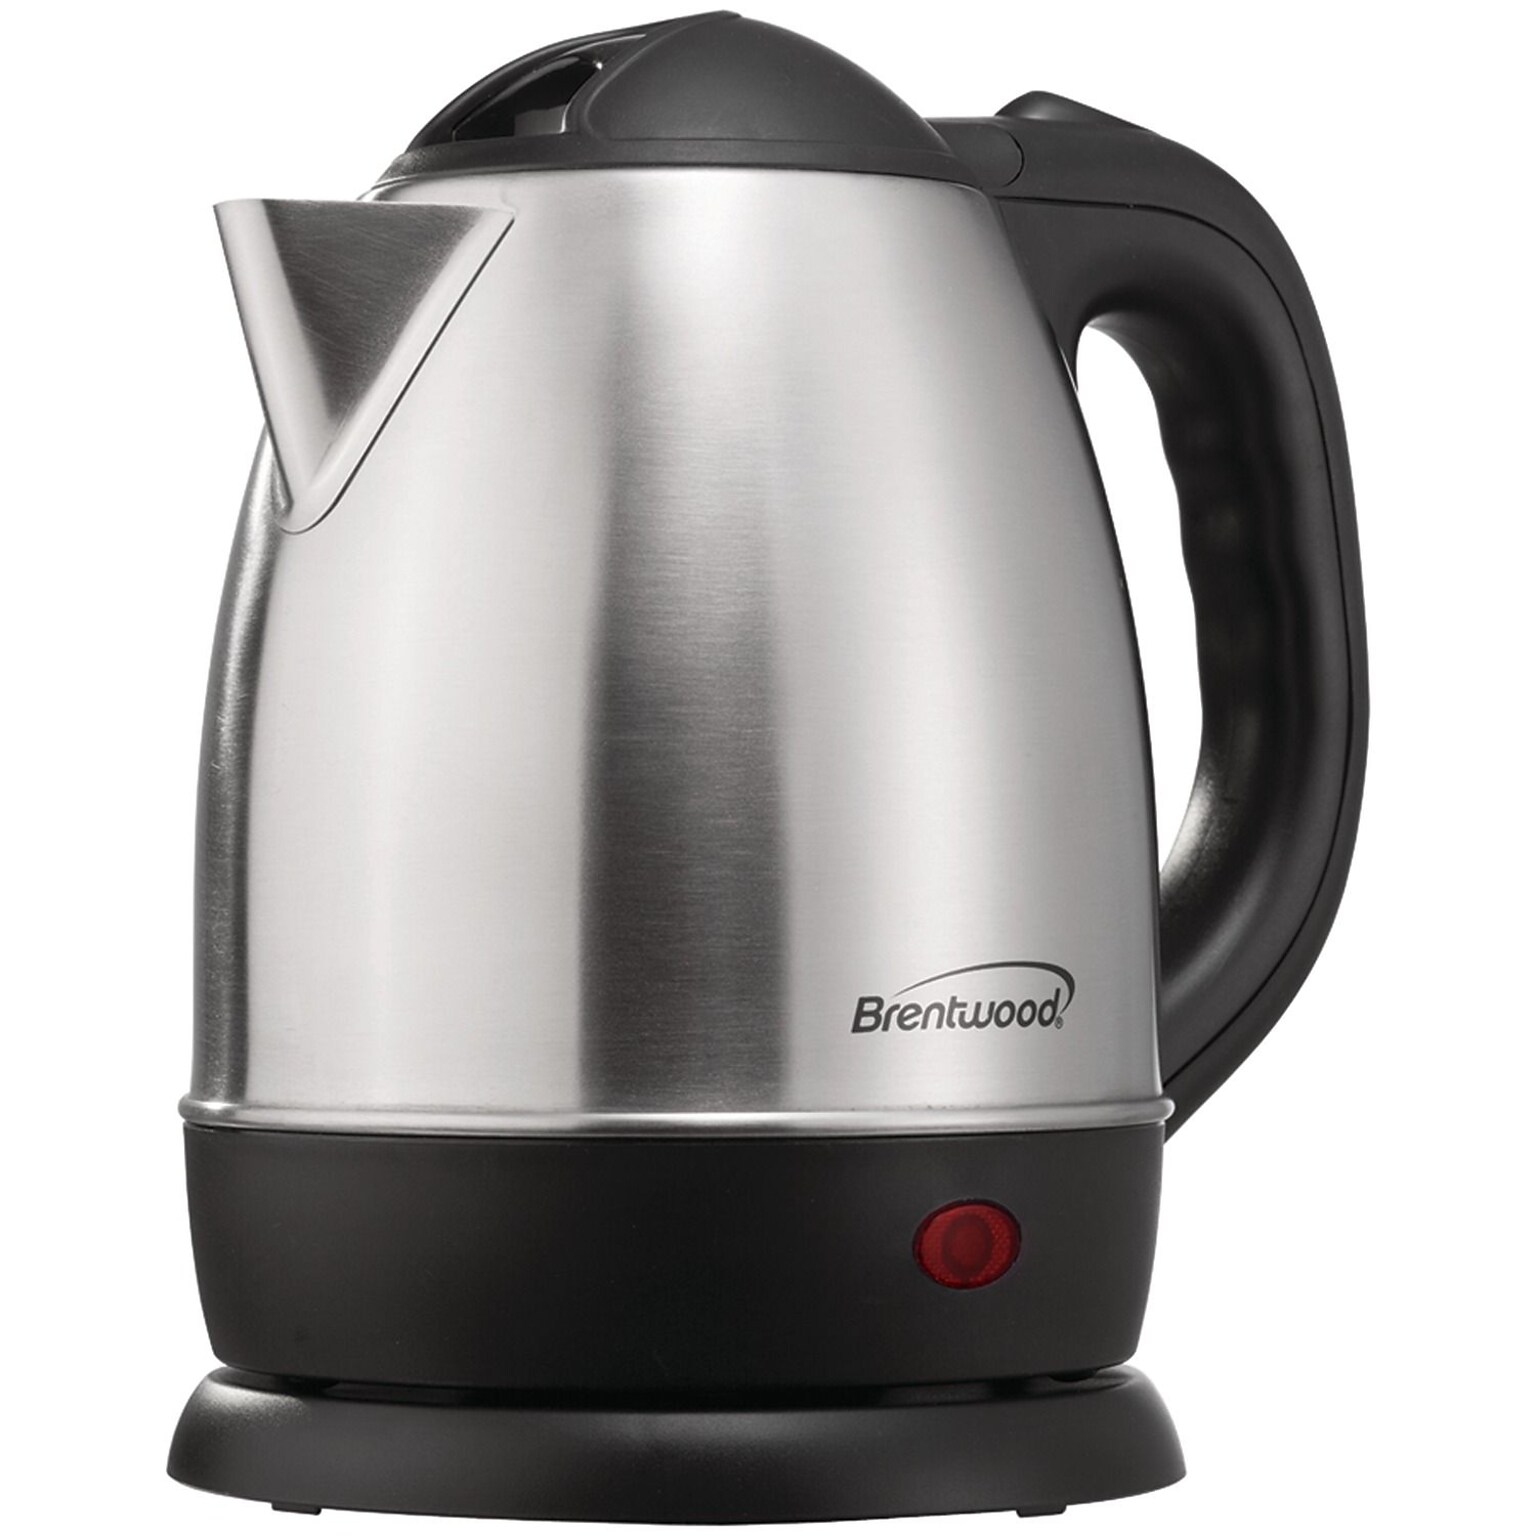 Brentwood Kt-1770 1.2-liter Stainless Steel Electric Cordless Tea Kettle